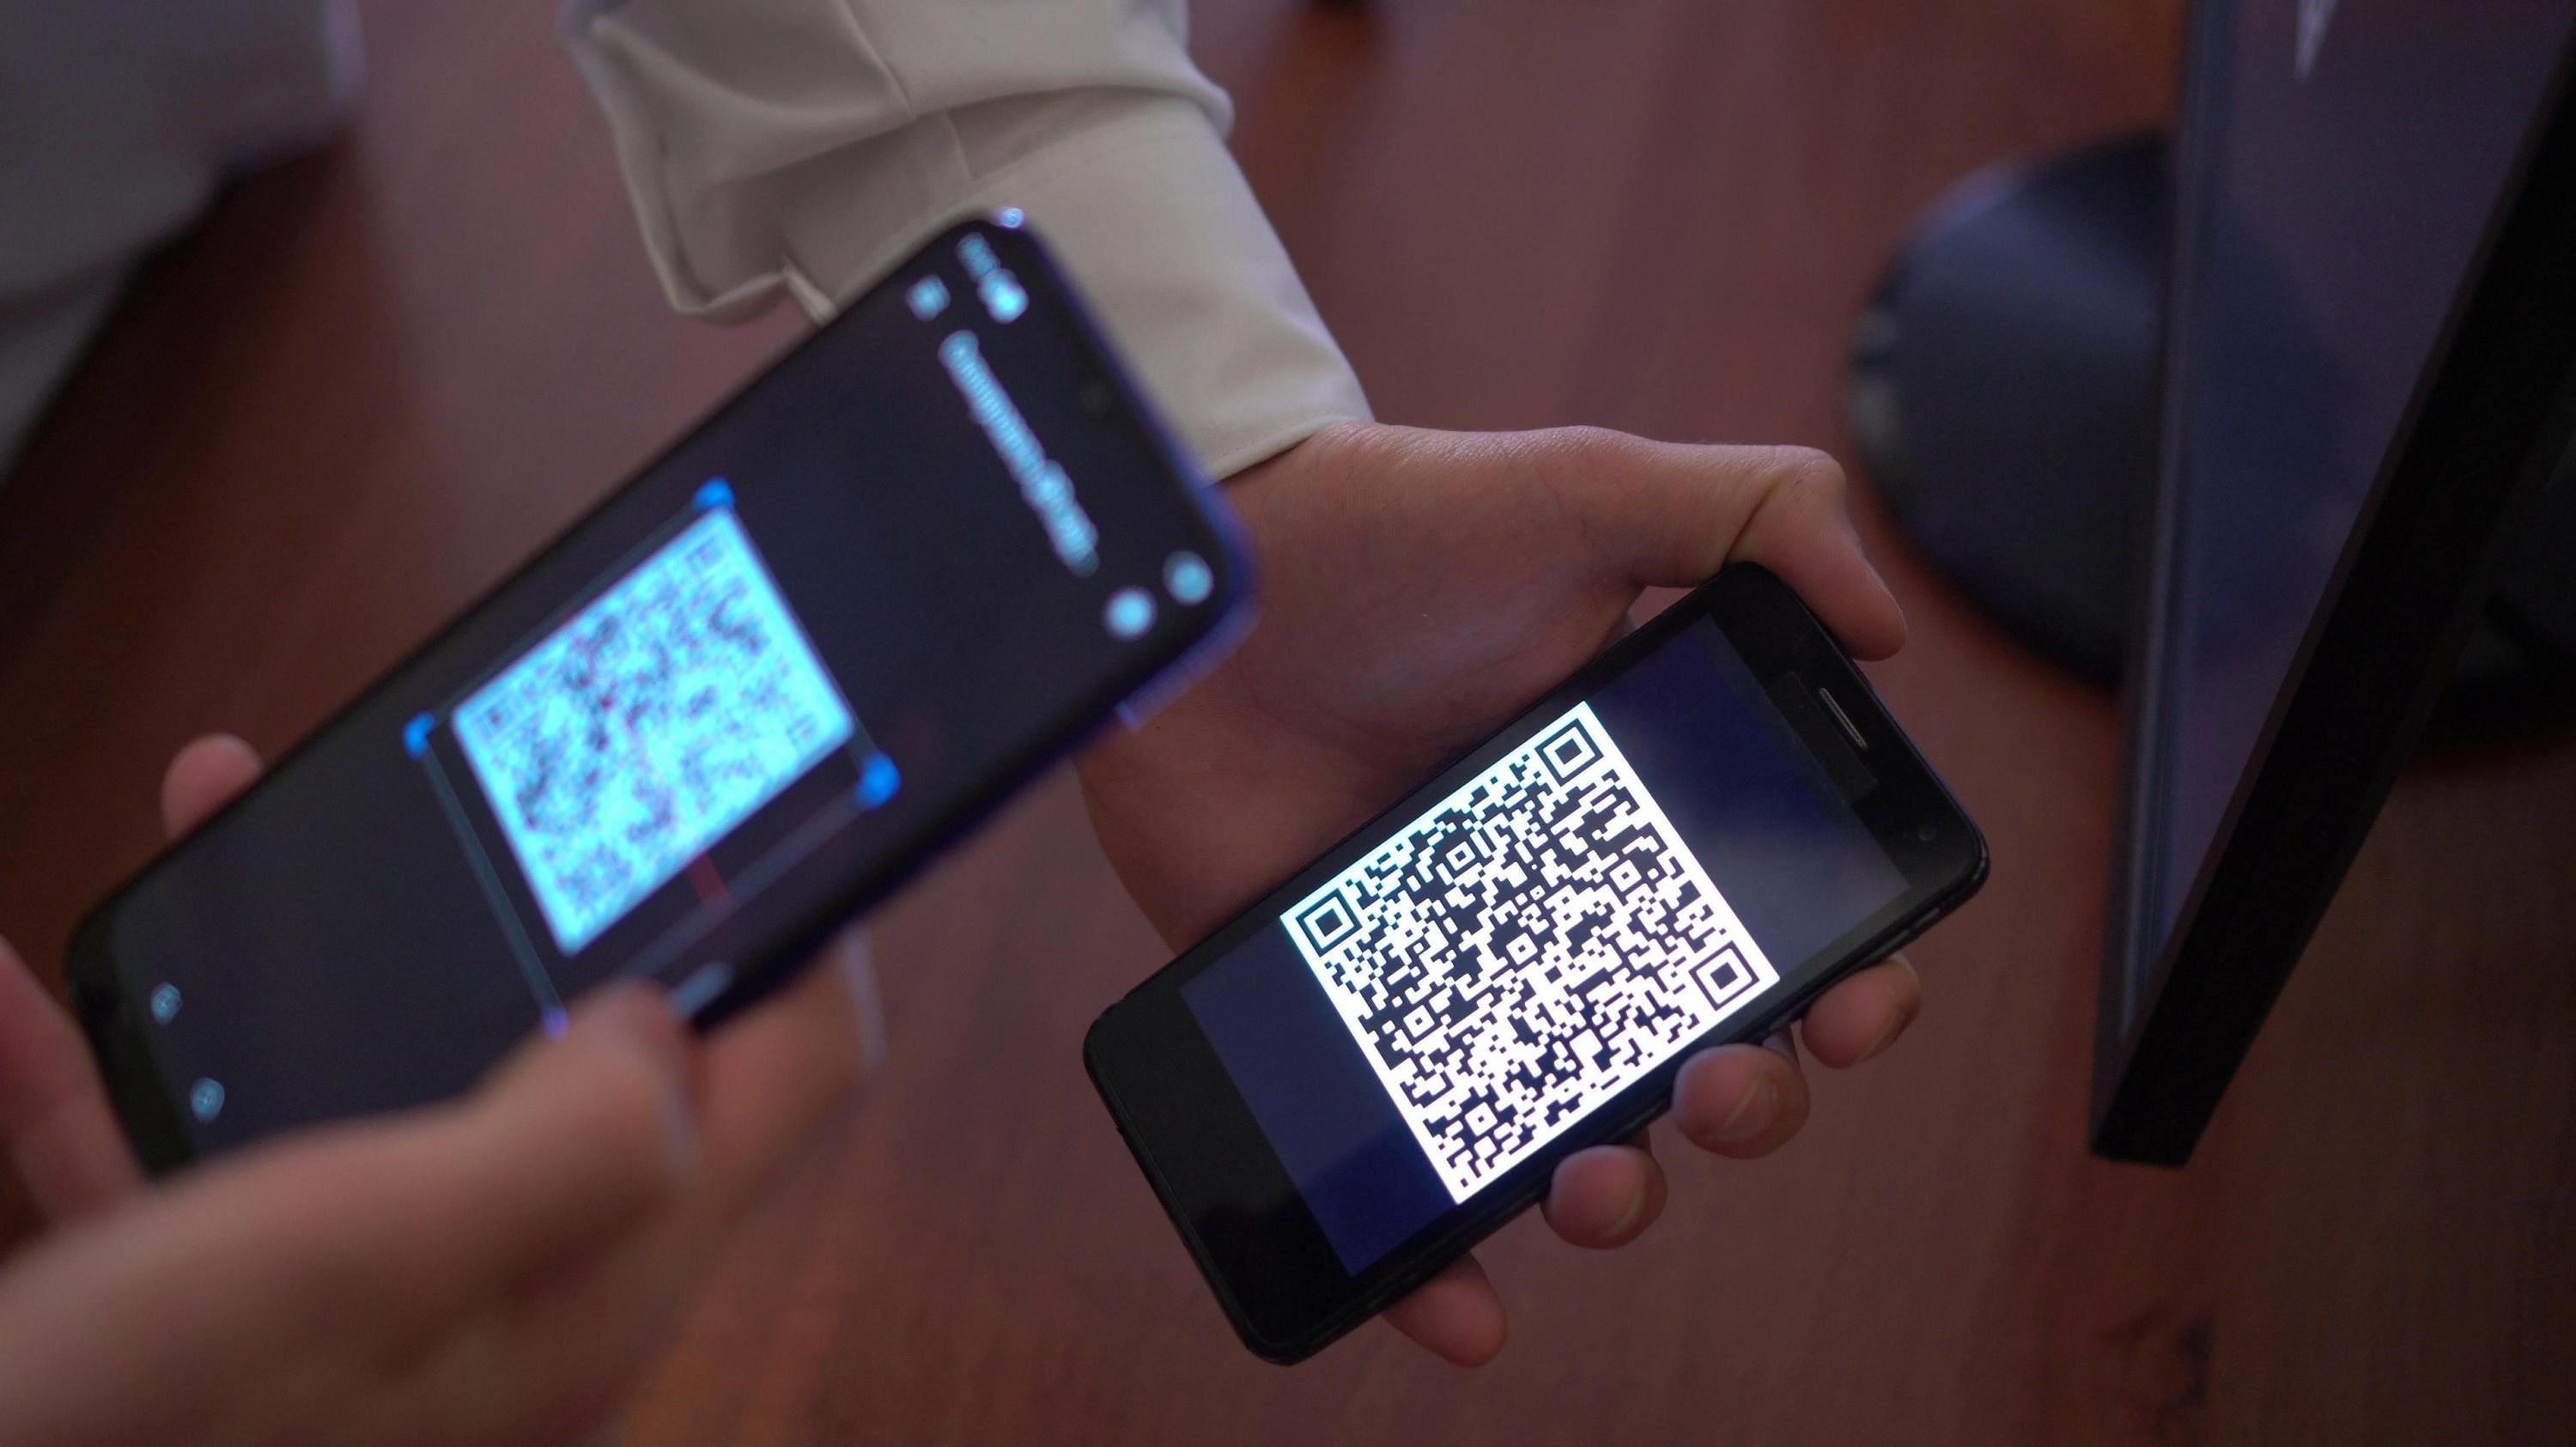 “Don’t flash everything and anything”: QR code scams are spreading in public spaces